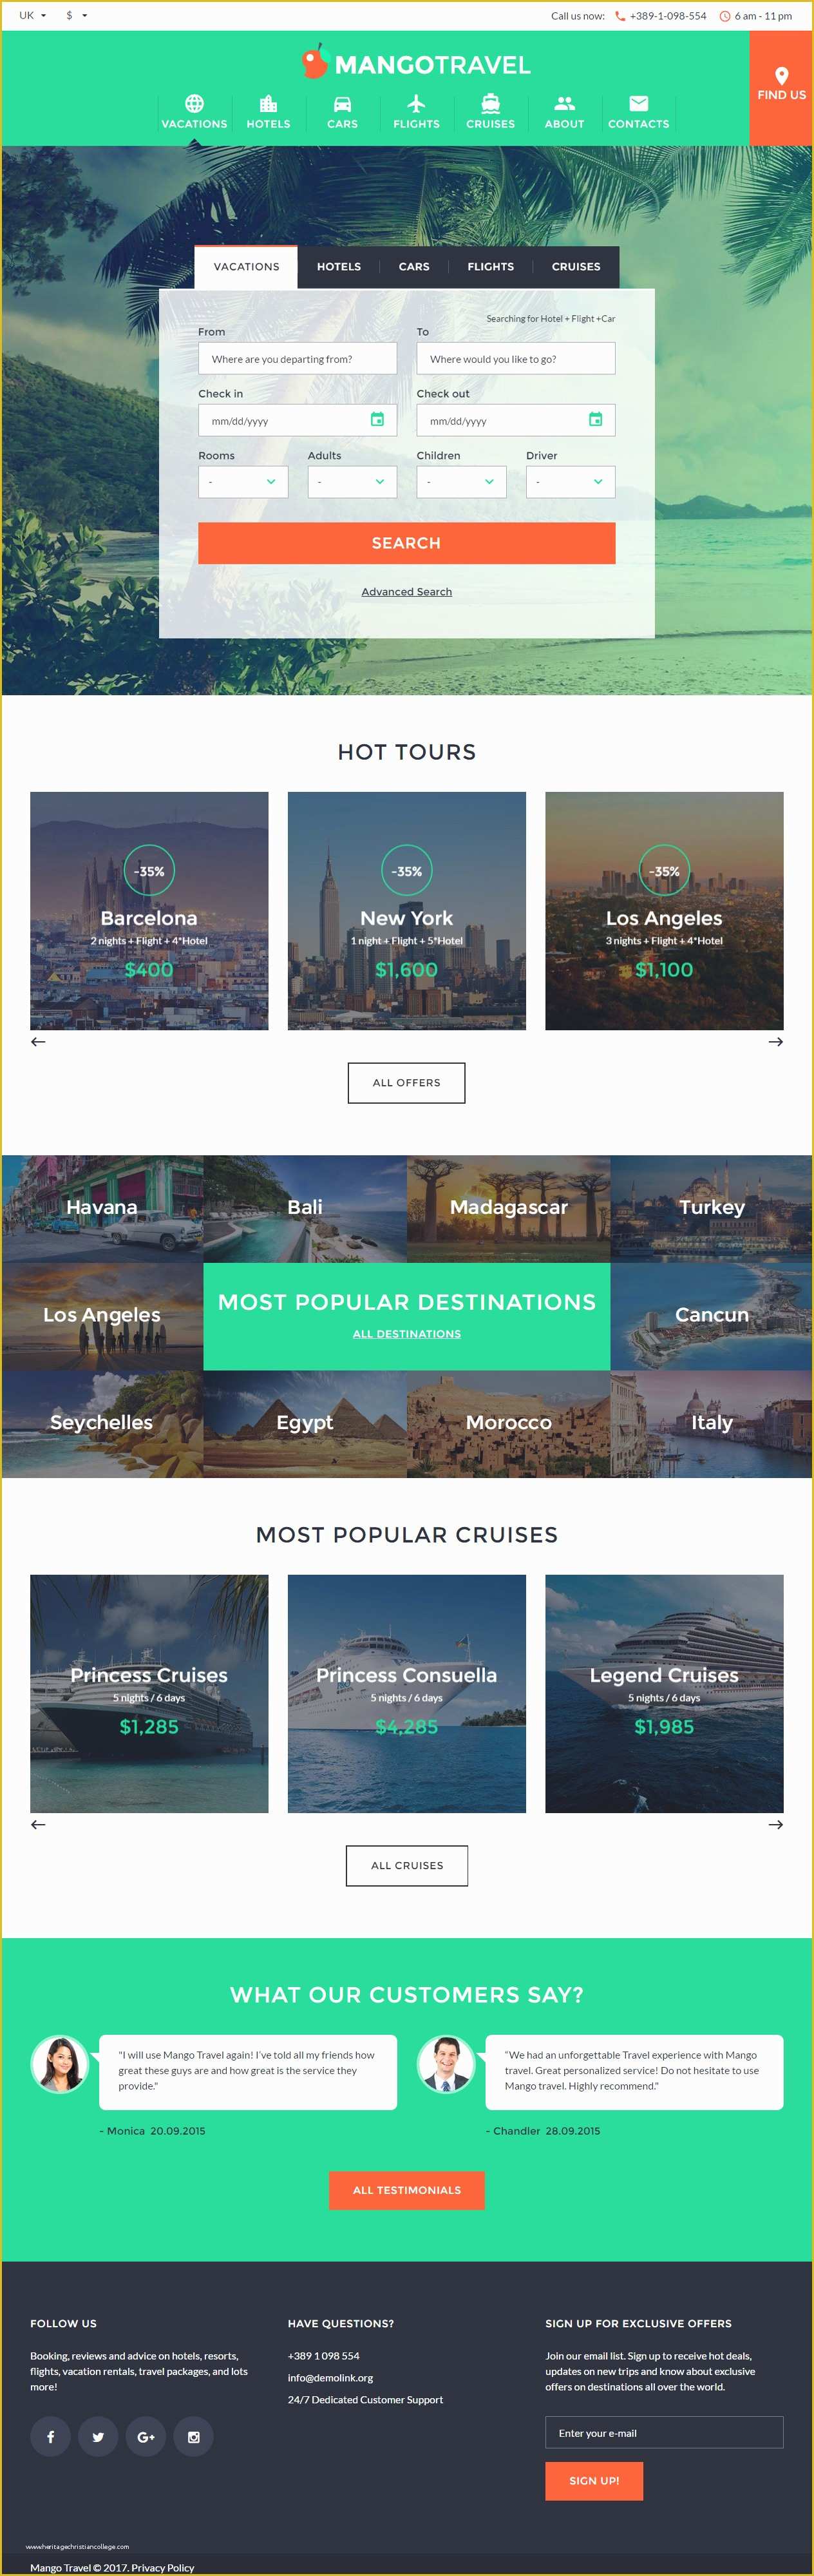 Html5 Template Free 2017 Of 25 Best Travel HTML5 Templates 2017 Responsive Miracle